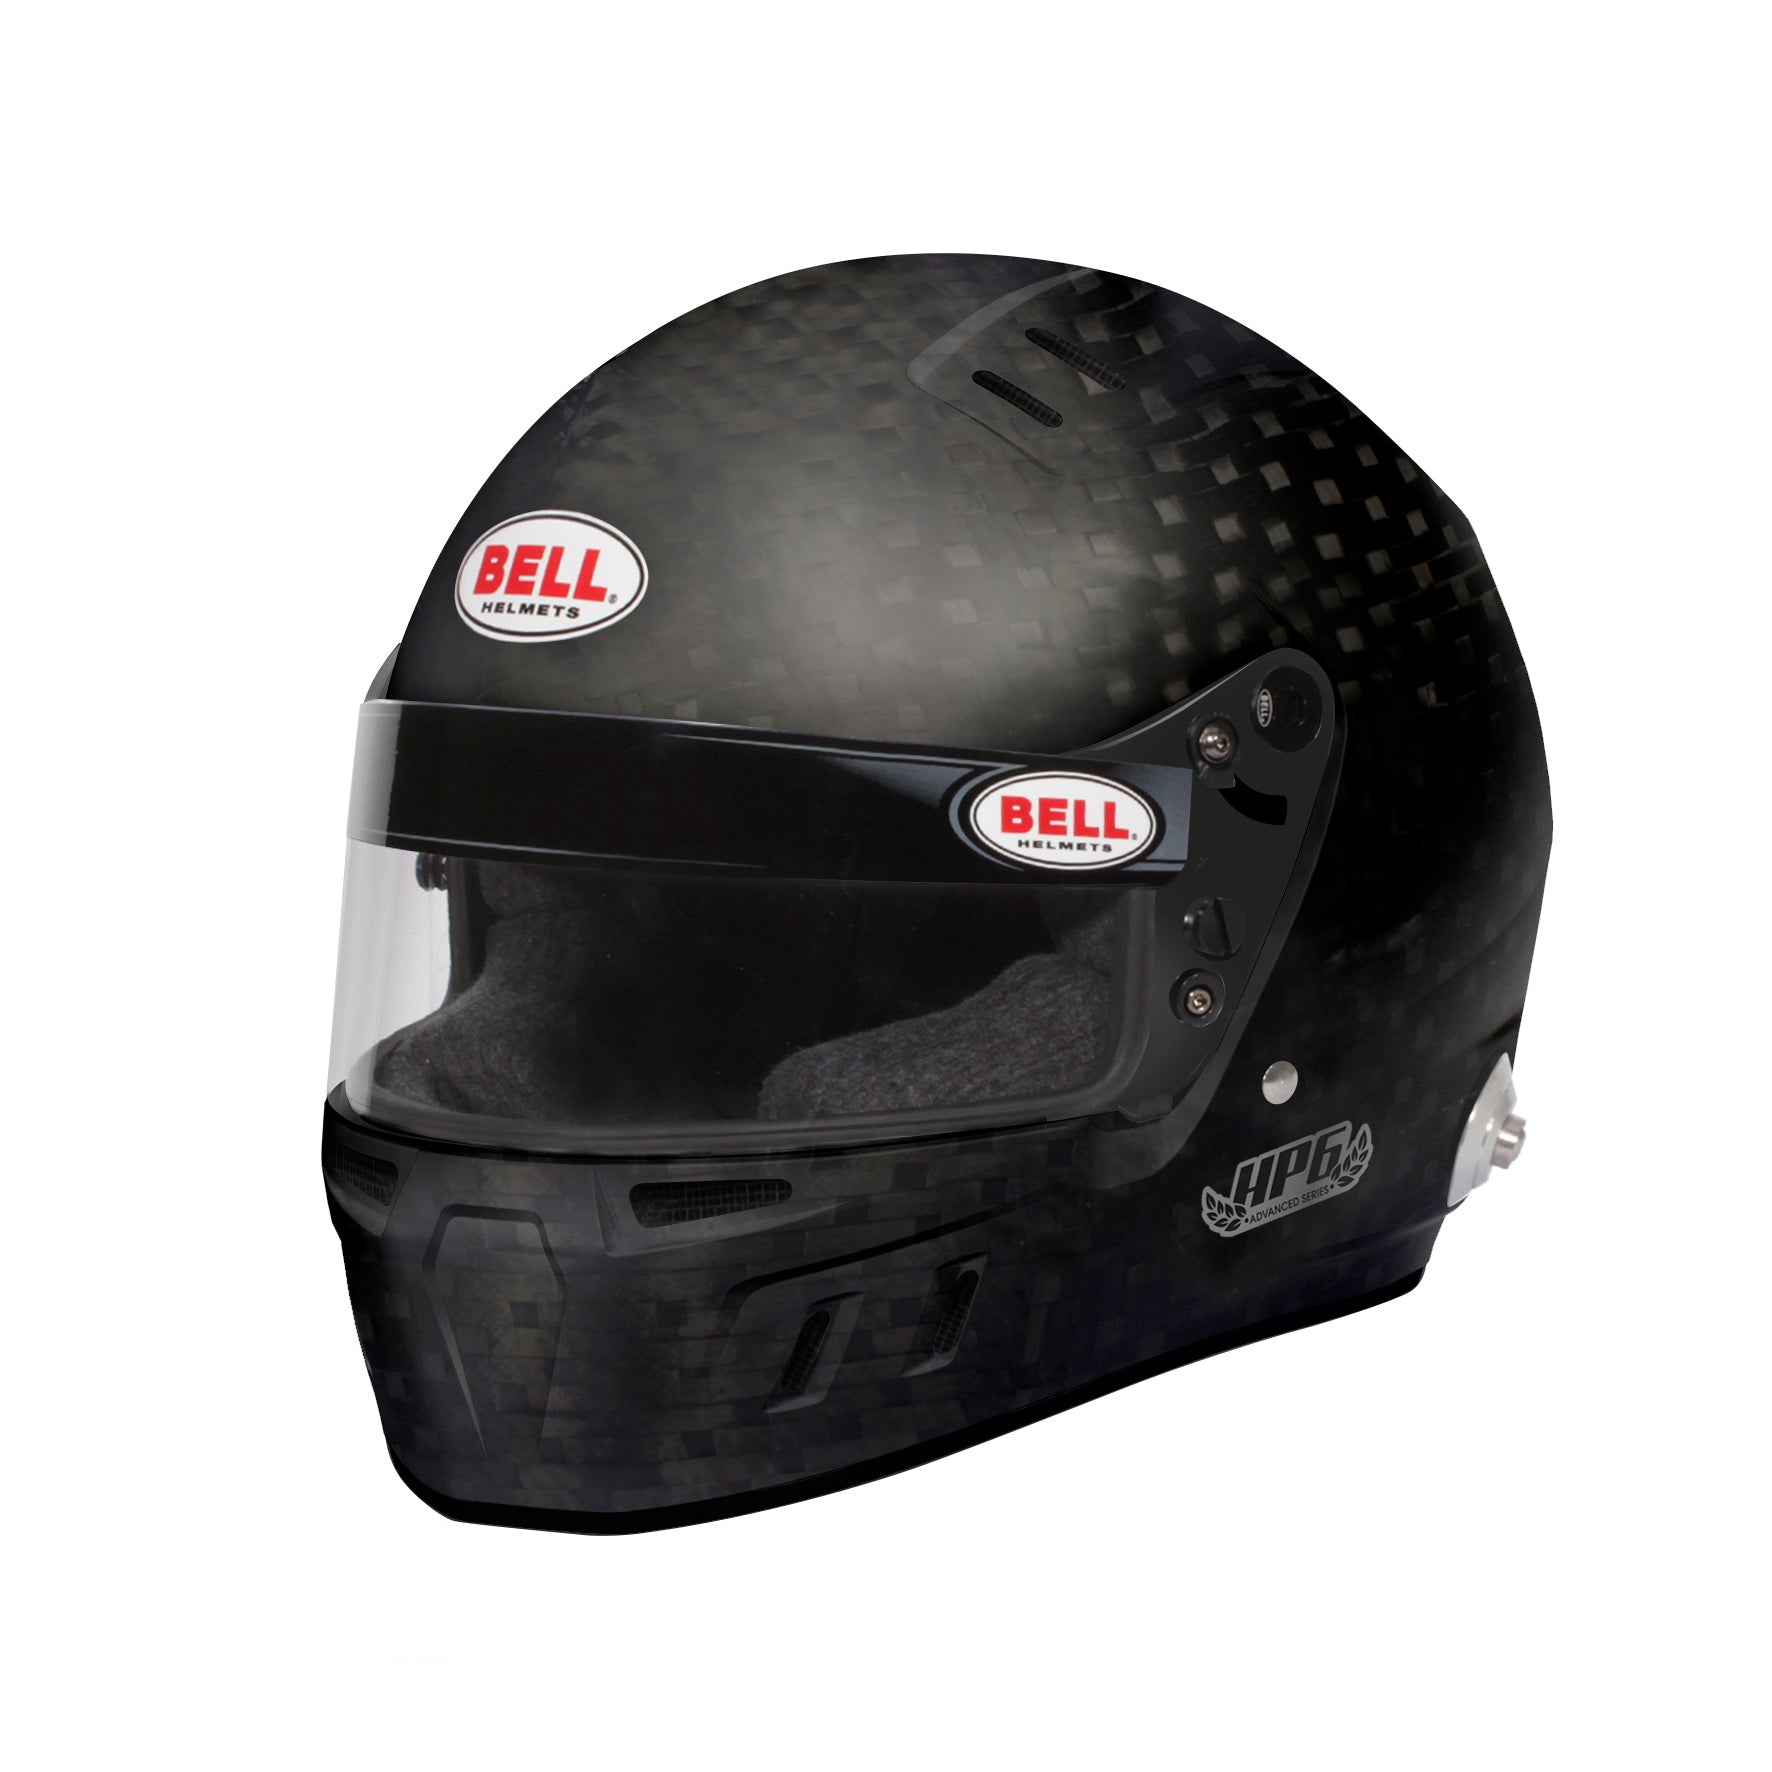 BELL 1140017 HP6 RD Шолом full-face, HANS, FIA8860-2018, carbon, size 61 (7 5/8) Photo-1 